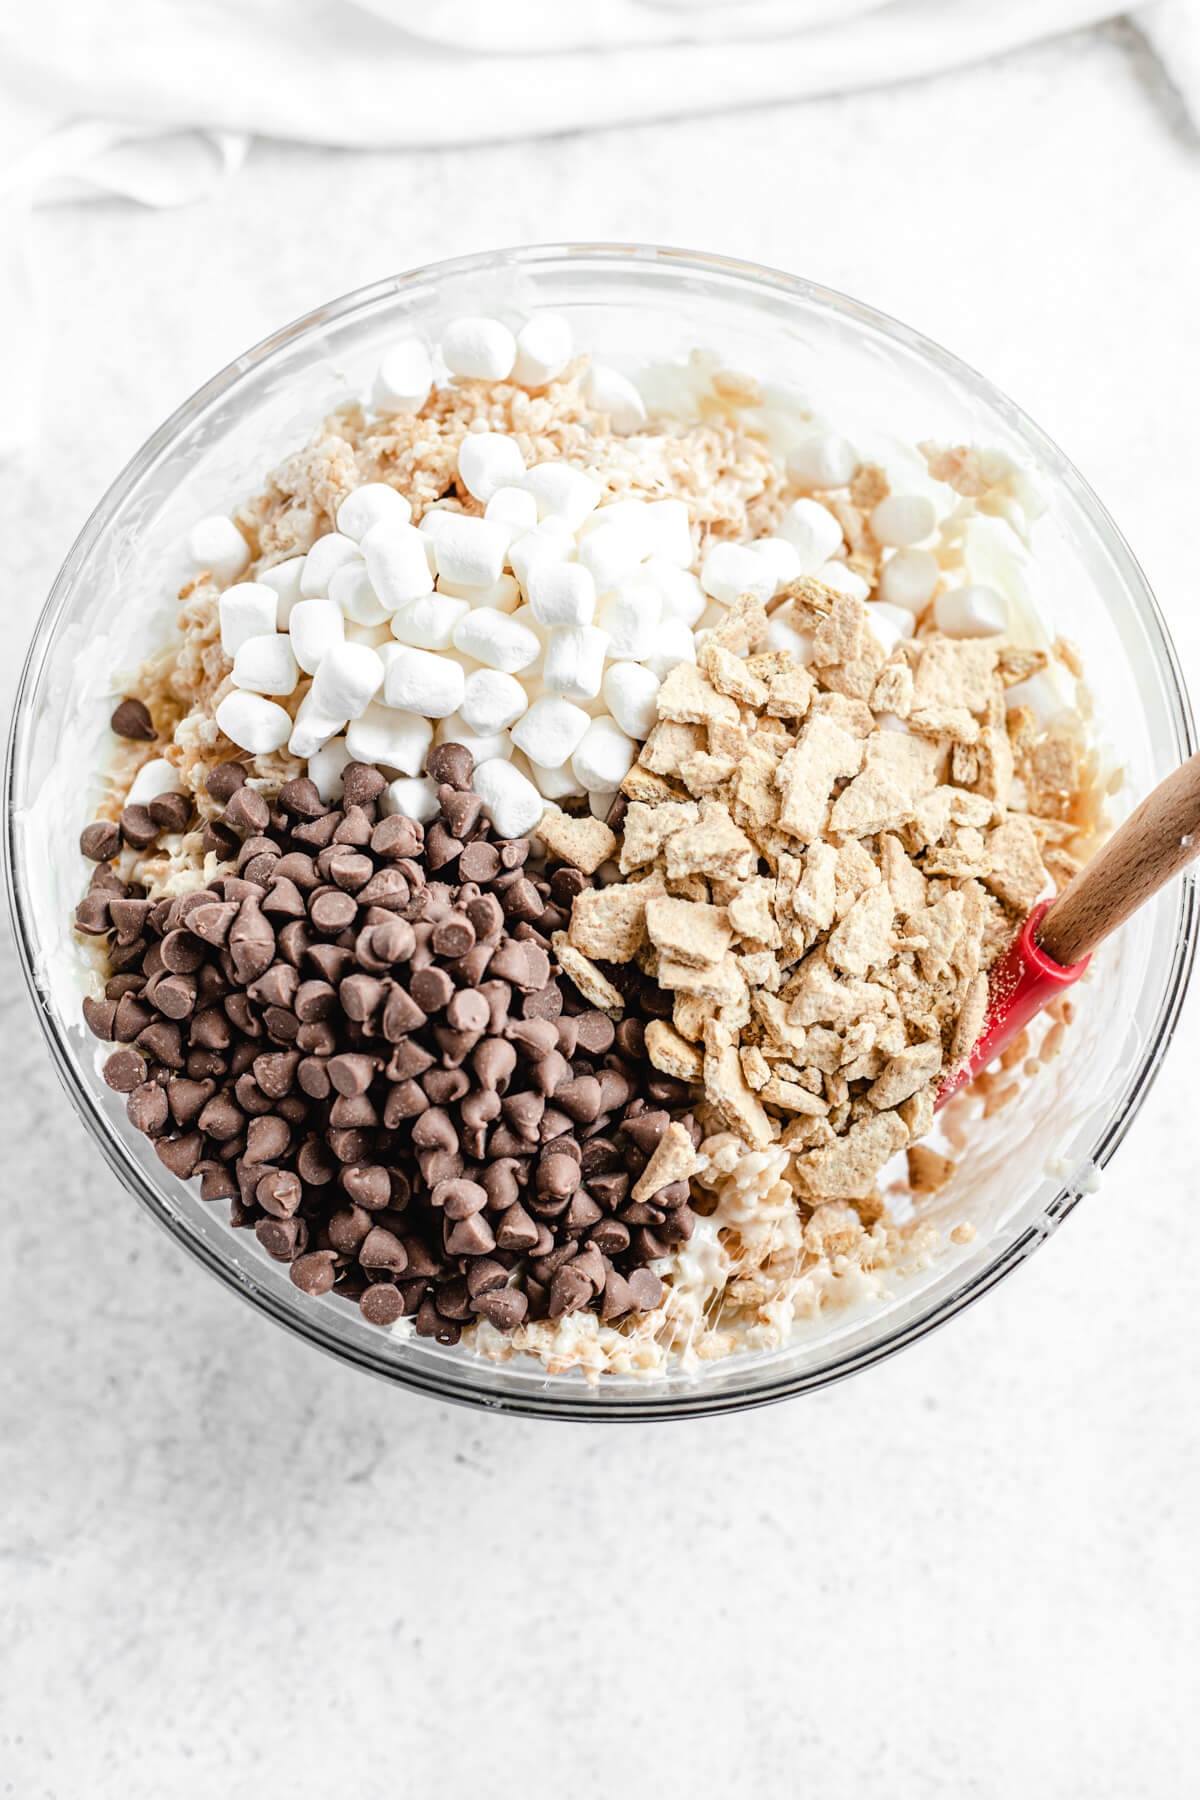 milk chocolate chips, crushed graham crackers and mini marshmallows in a bowl of Rice Krispie treats with rubber spatula inside bowl